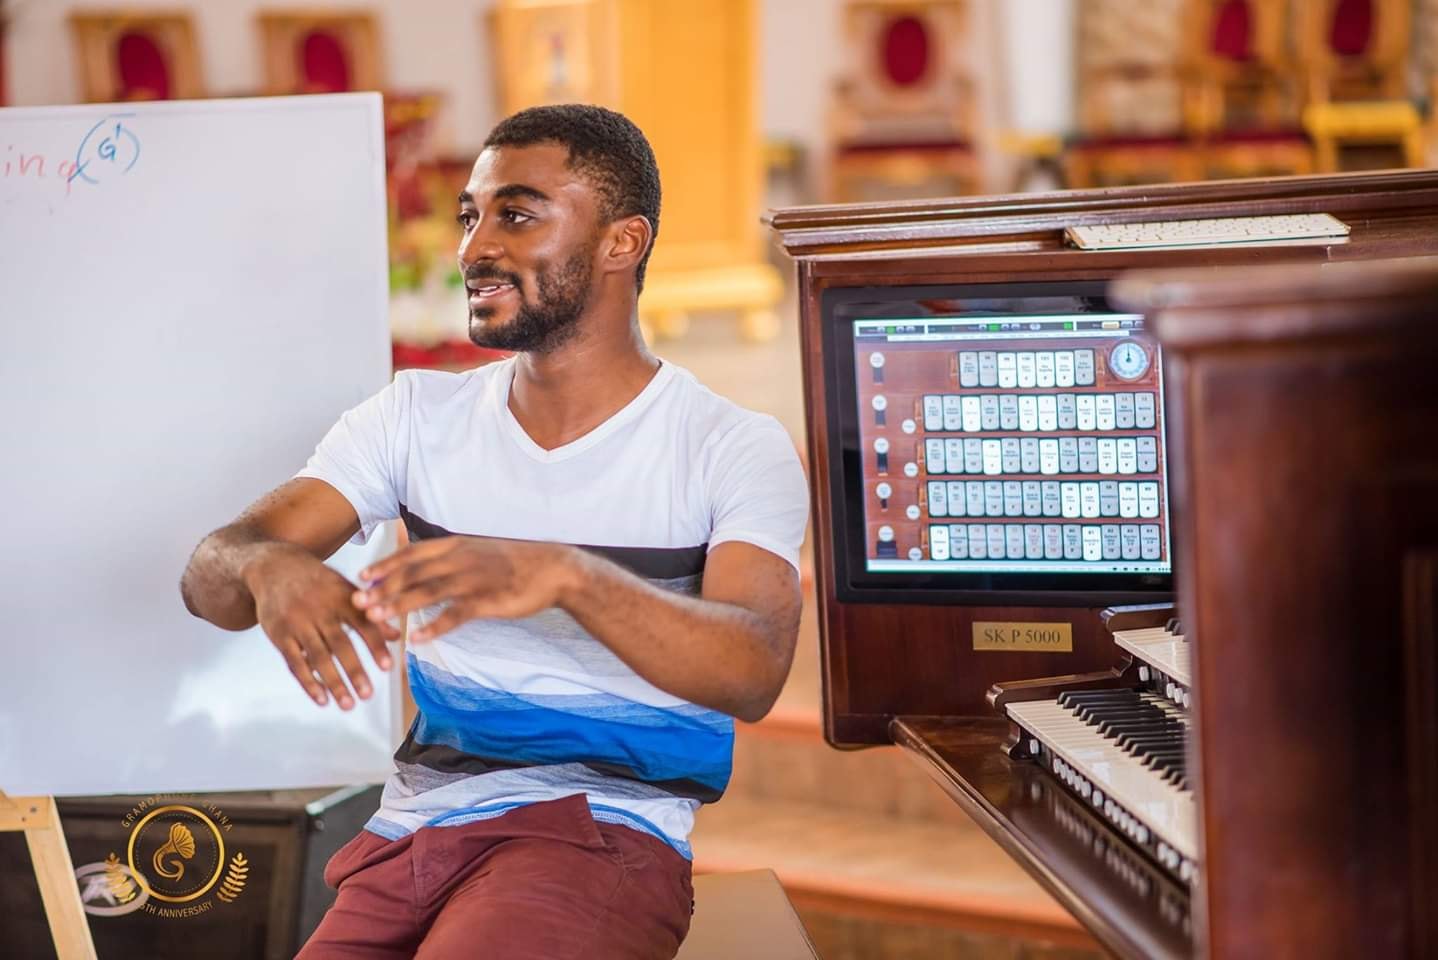 The Ghanaian Organ Maker Kwaku Boakye-Frempong spoke to Samuel Ekow Kwofie, the CEO of Olive Organs, the first Ghanaian organ maker, about the unique business he is exploring in the music space.